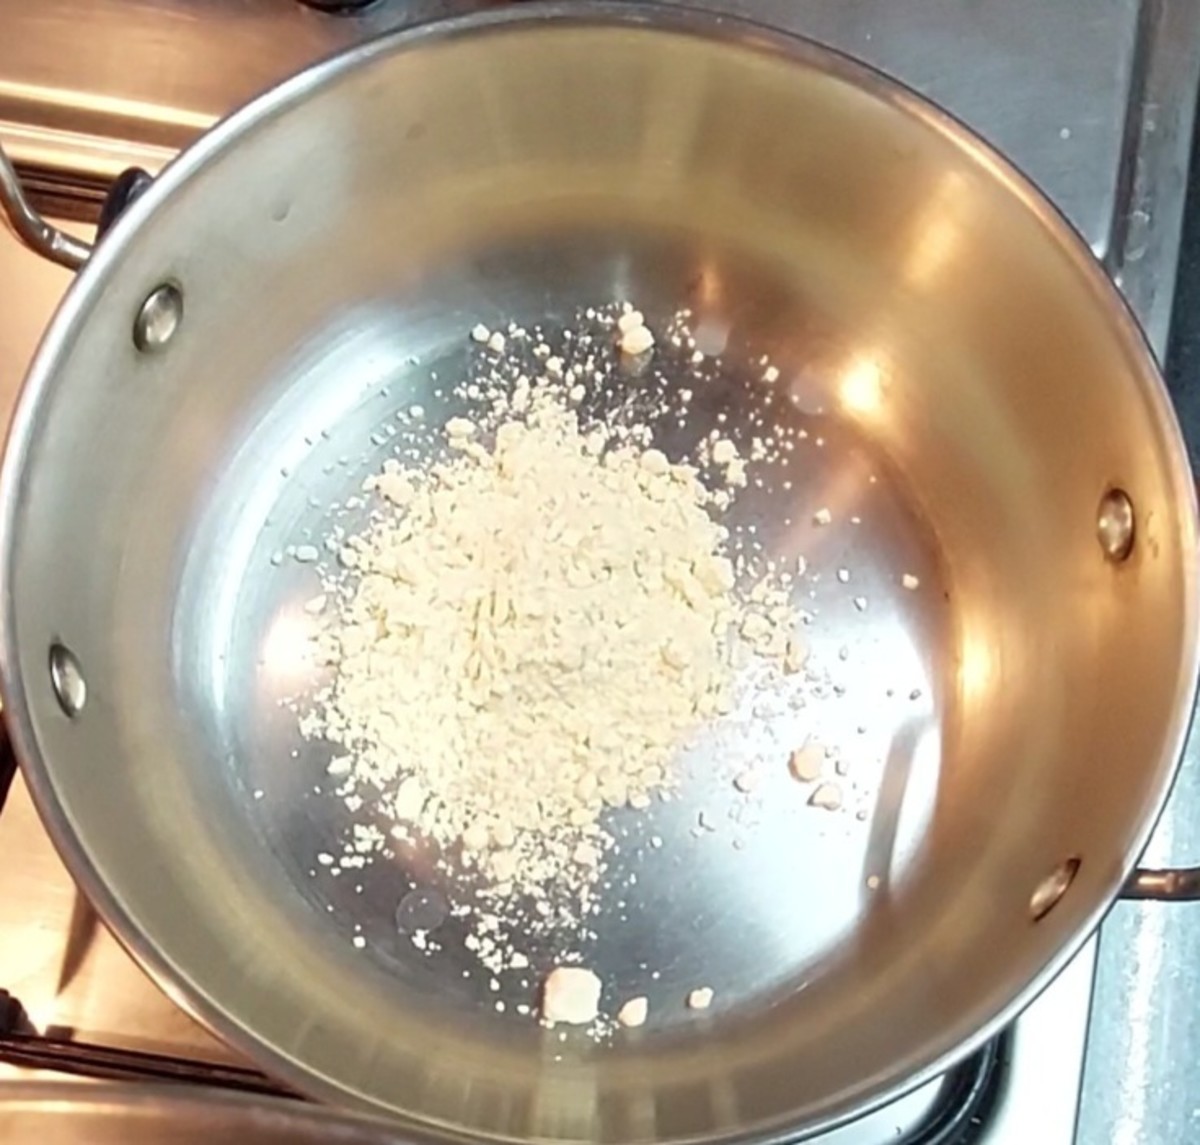 In a frying pan, add 1 1/2 teaspoon besan flour and fry till the raw smell goes away (about 5 minutes). Transfer to a plate and set aside.